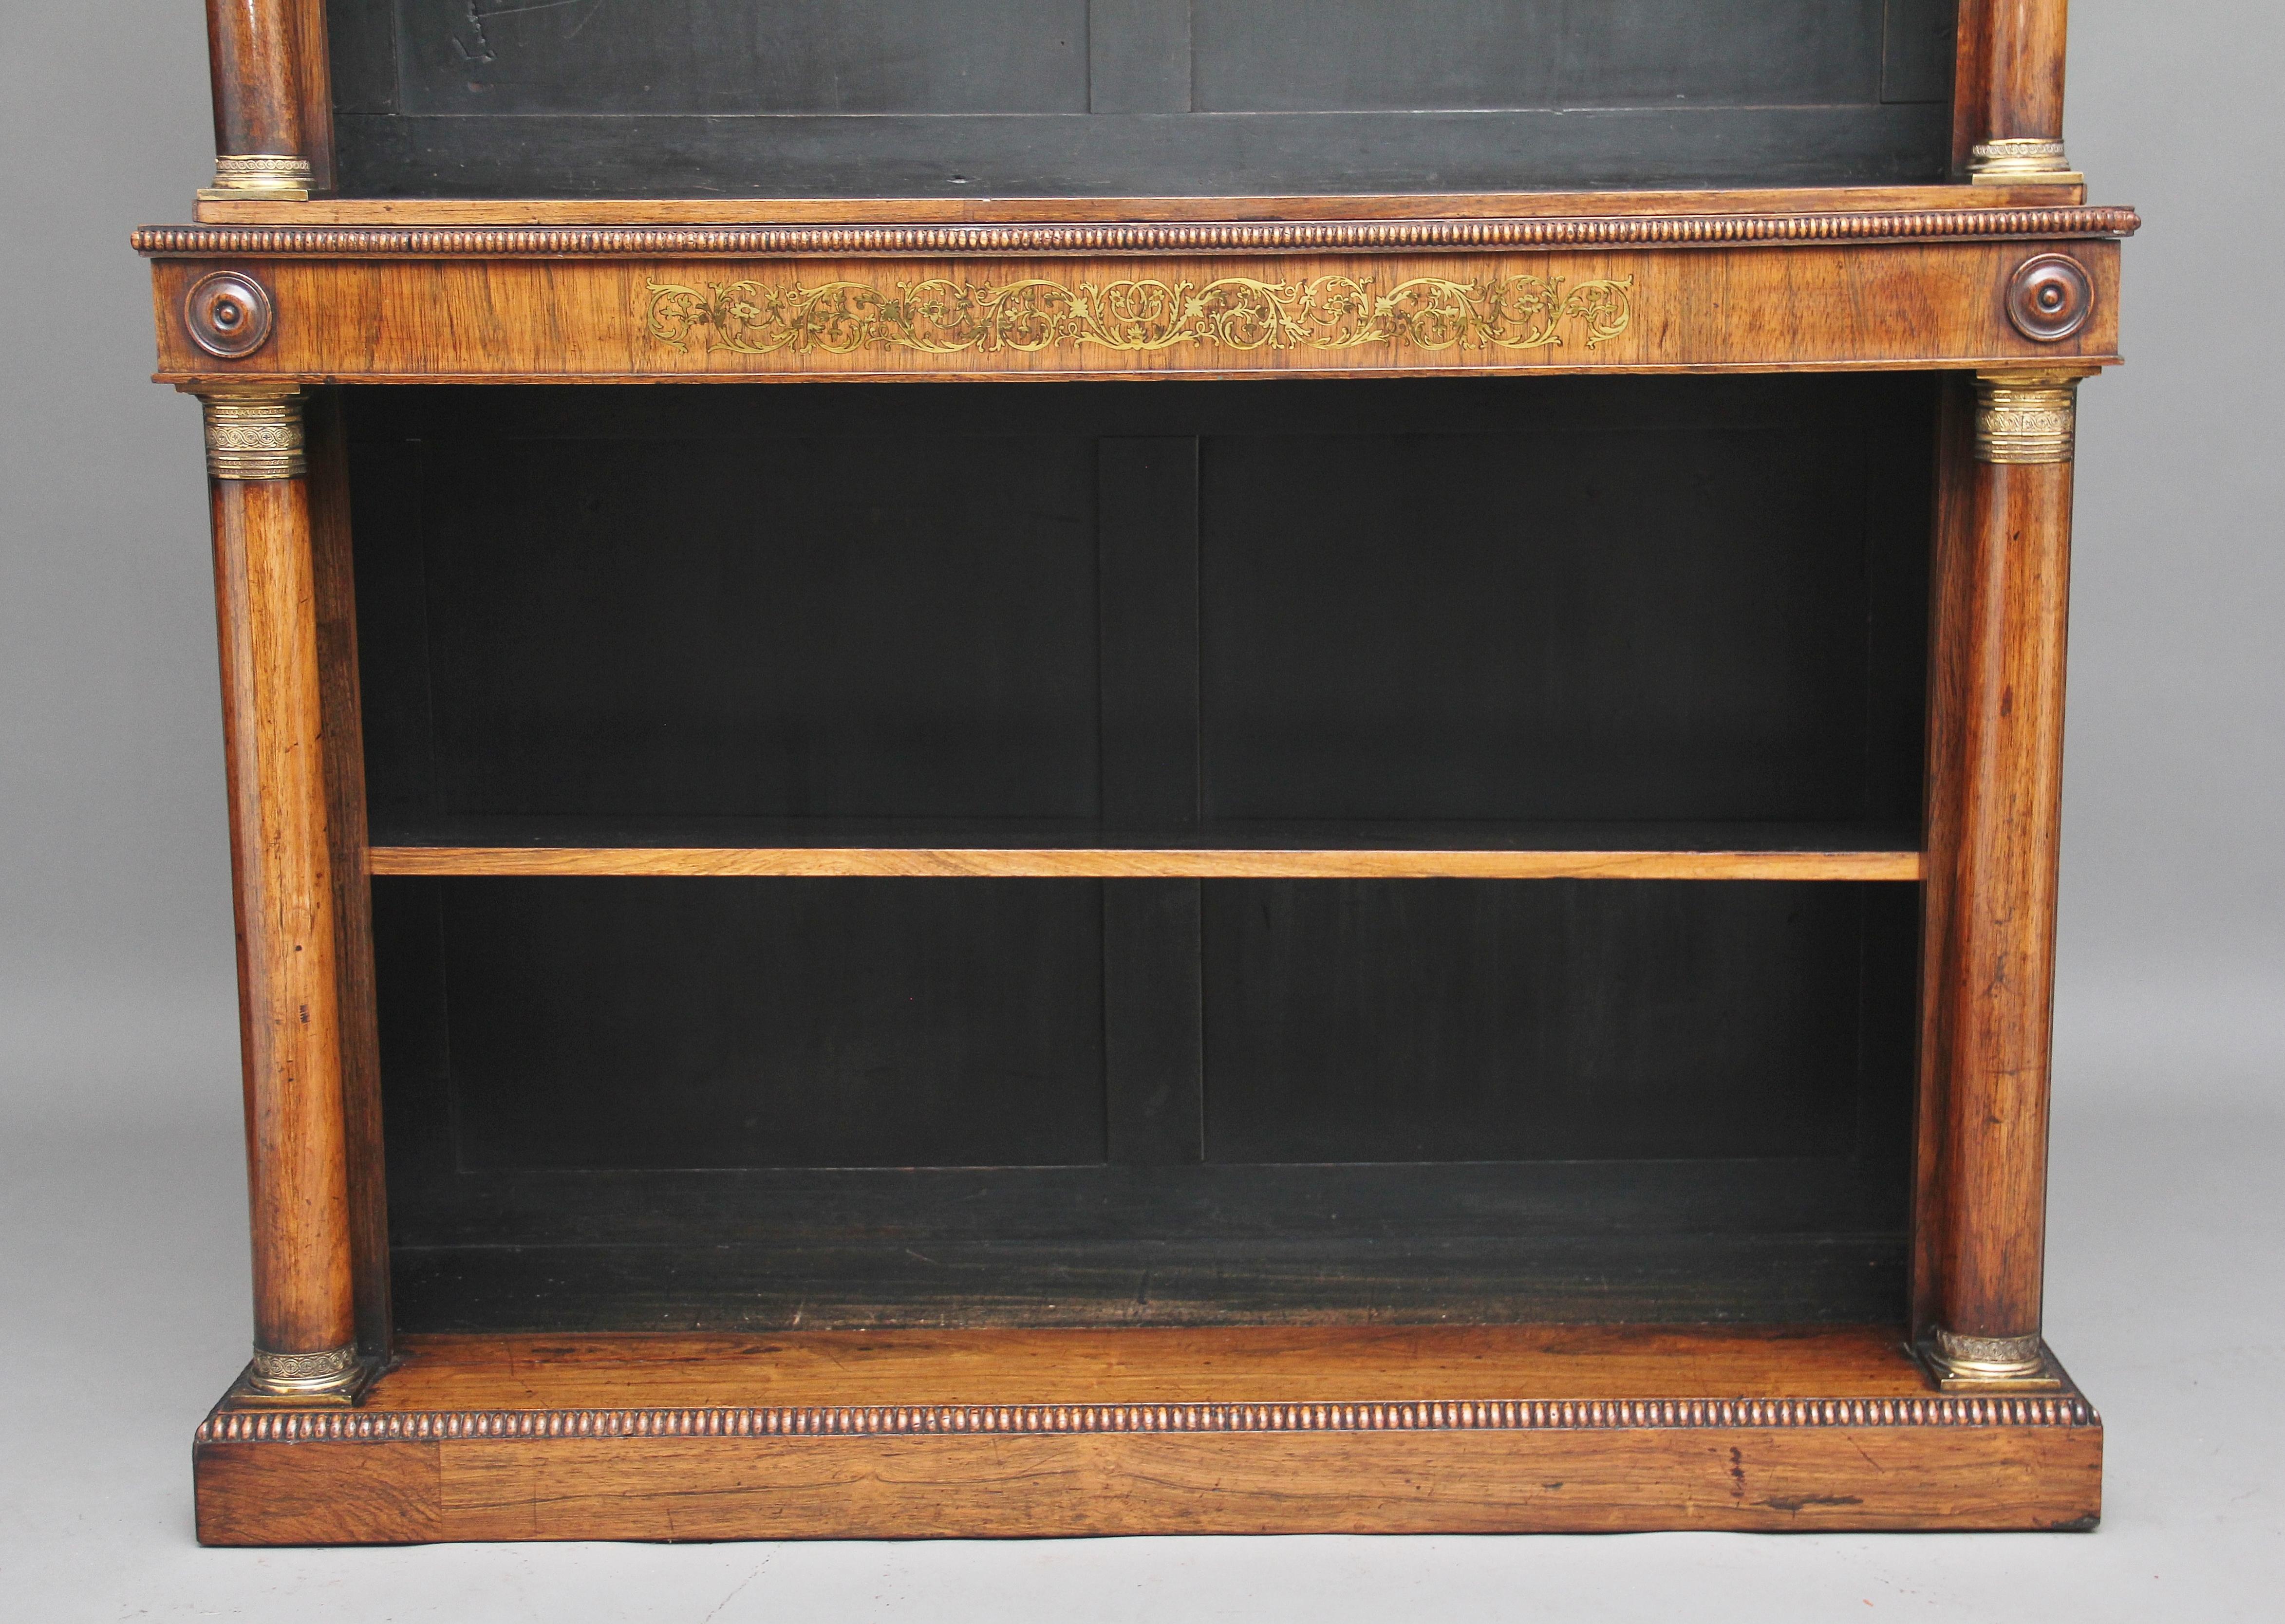 Early 19th Century Rosewood and Brass Inlaid Bookcase (Regency)